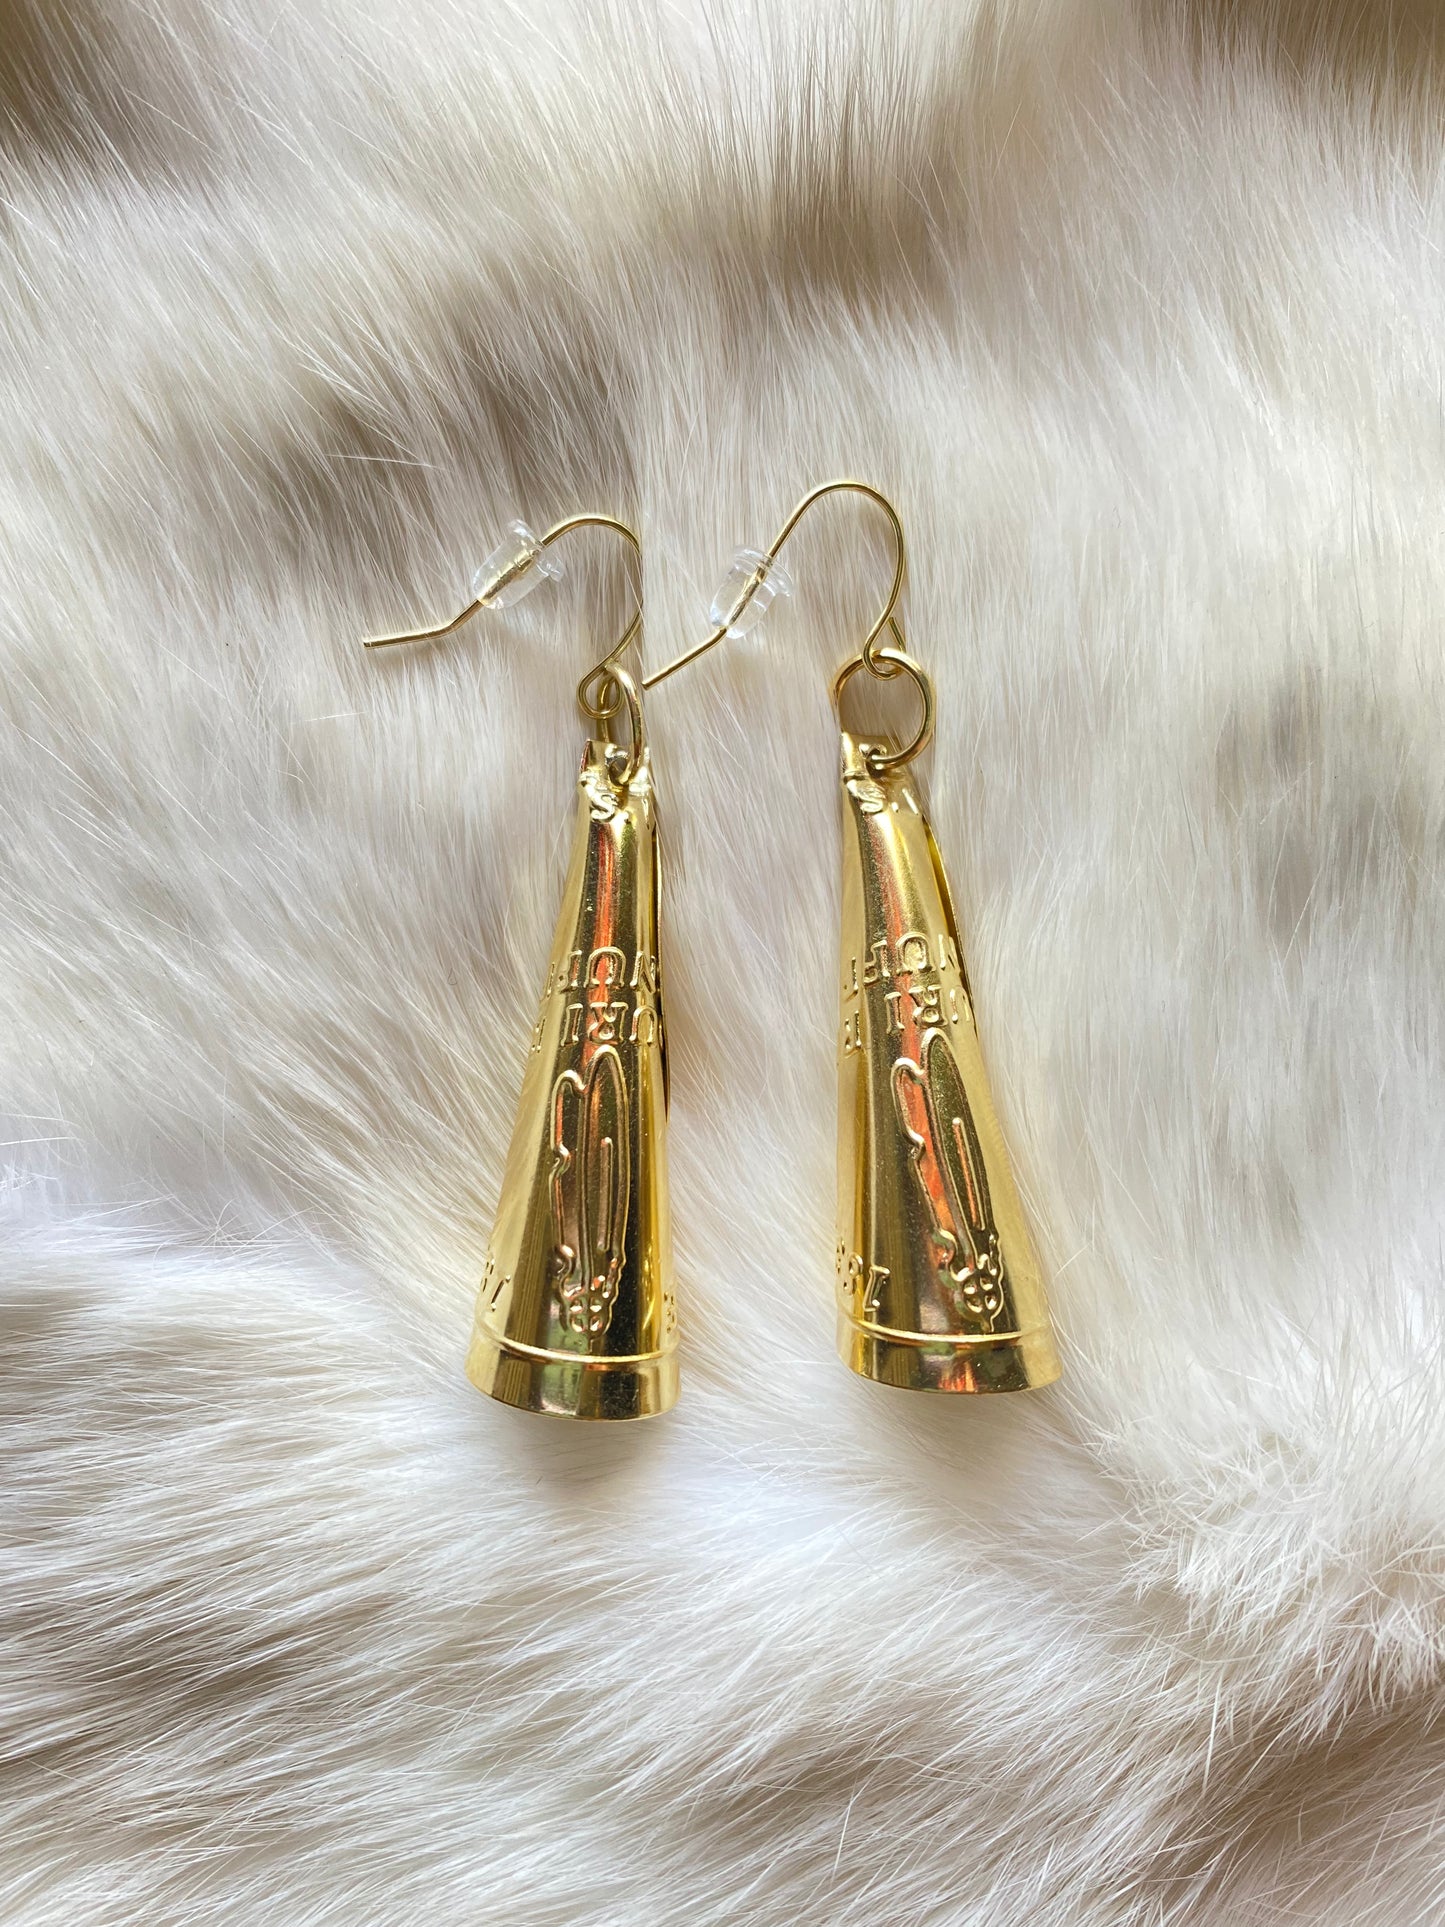 Gold Jingle Cone Earrings by Beading It Real